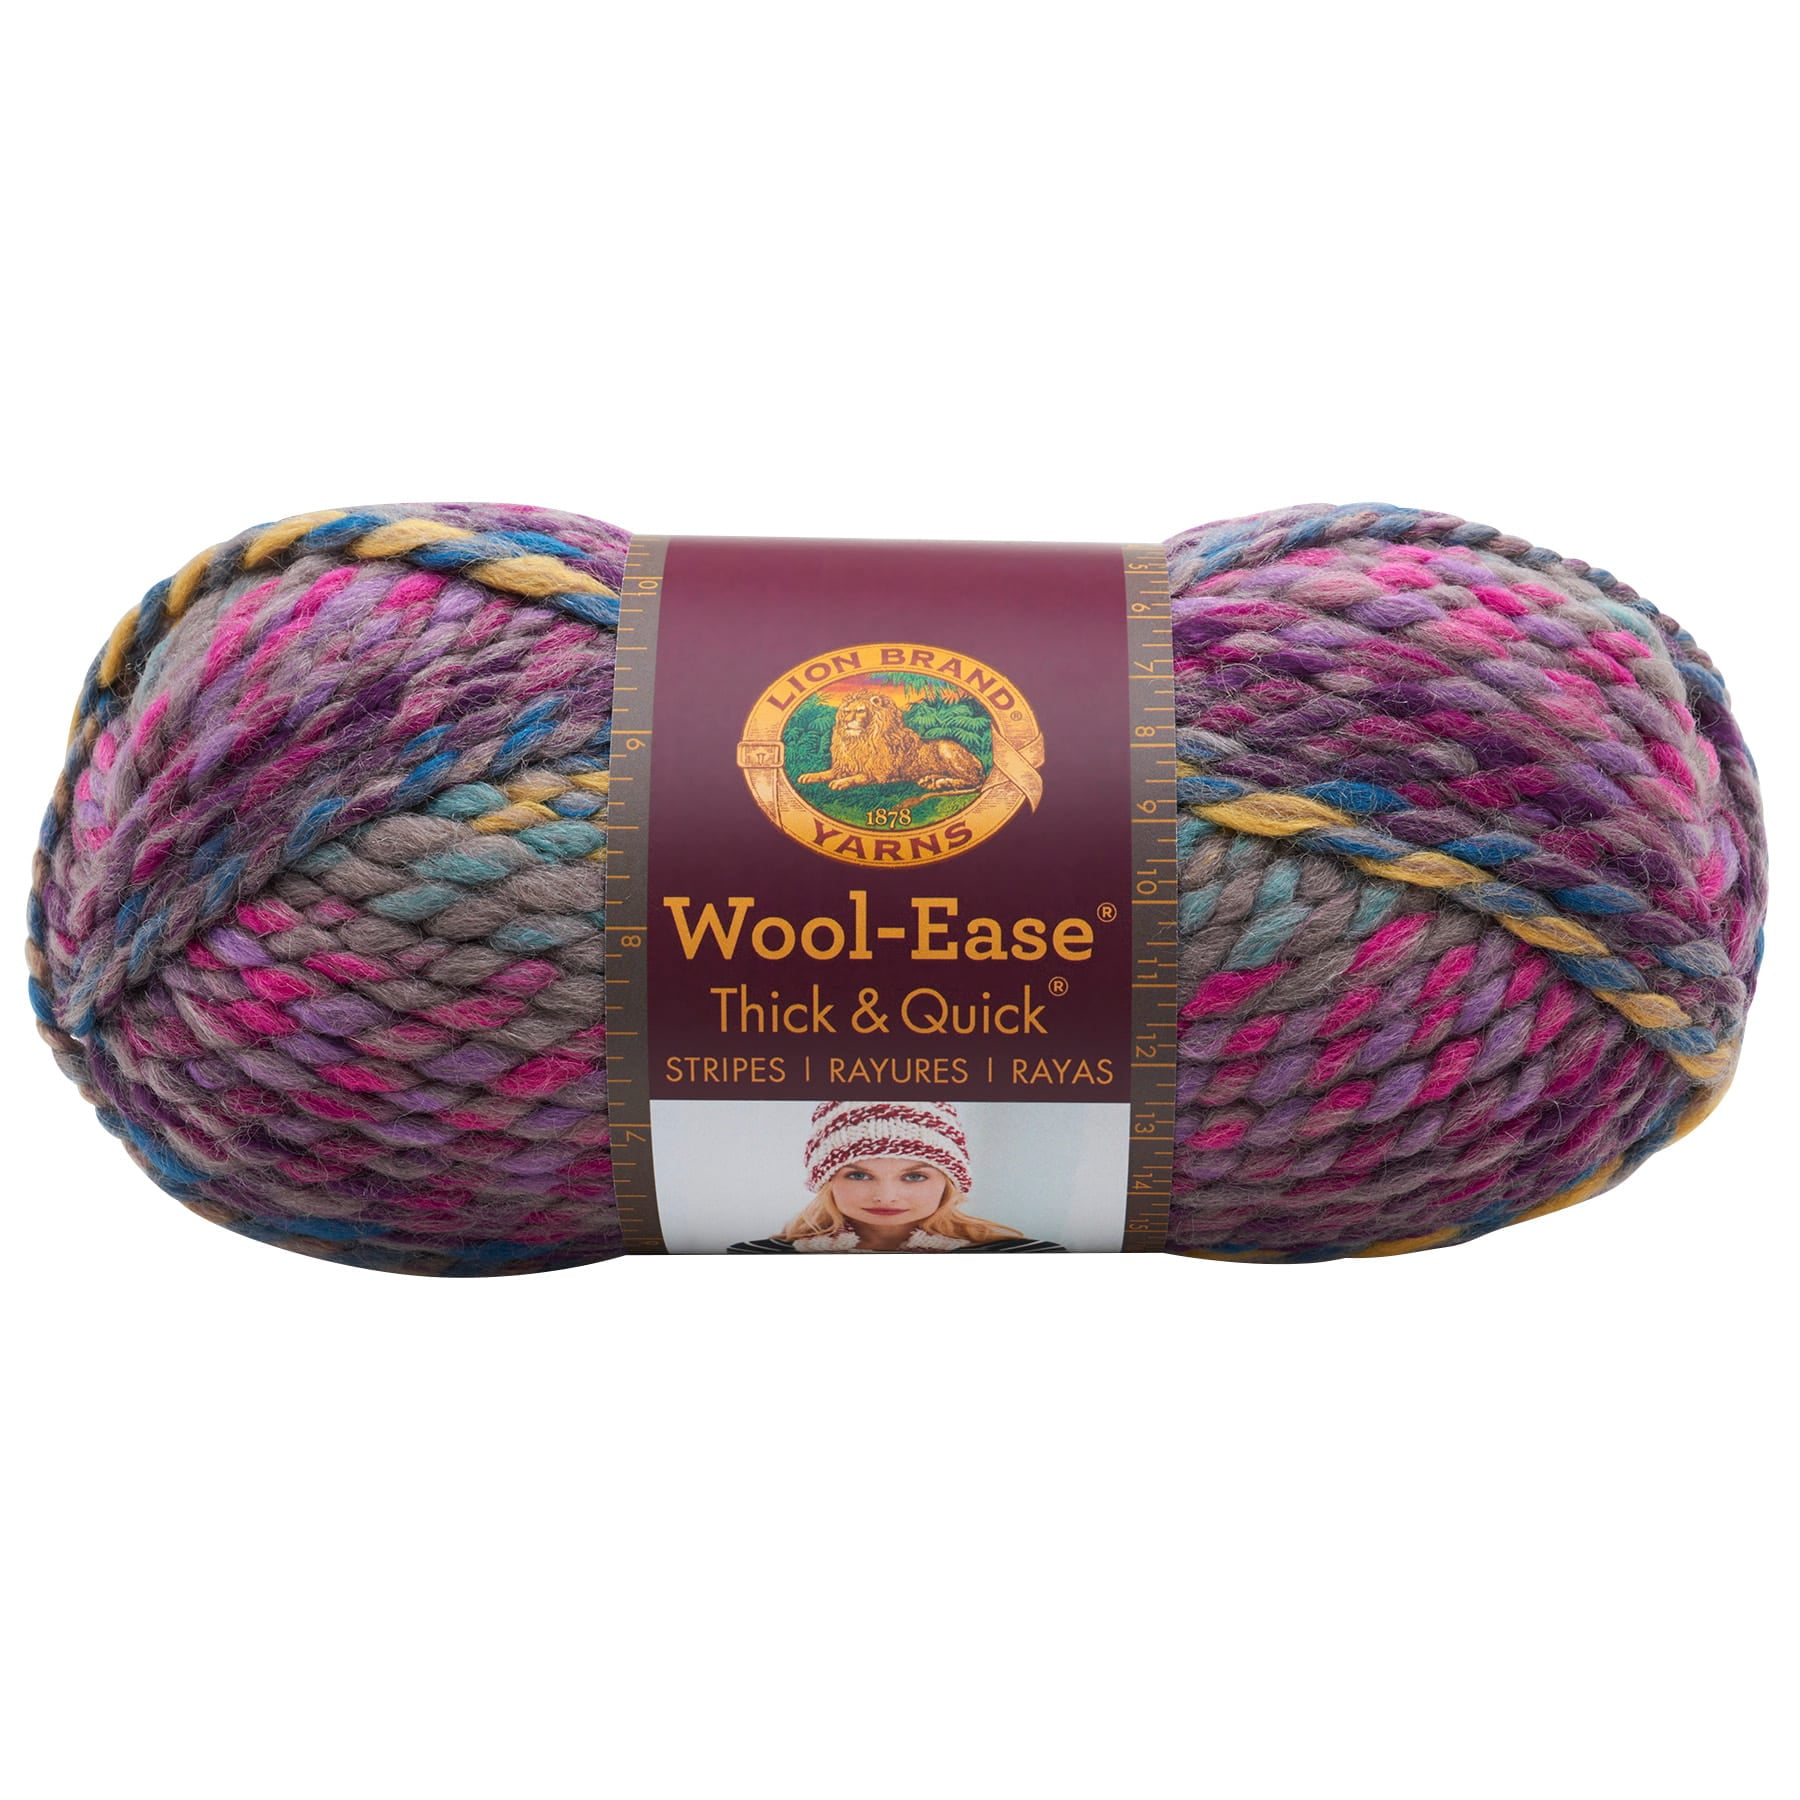 Lion Brand Wool-Ease Thick & Quick Yarn-Air Force, 1 count - Fry's